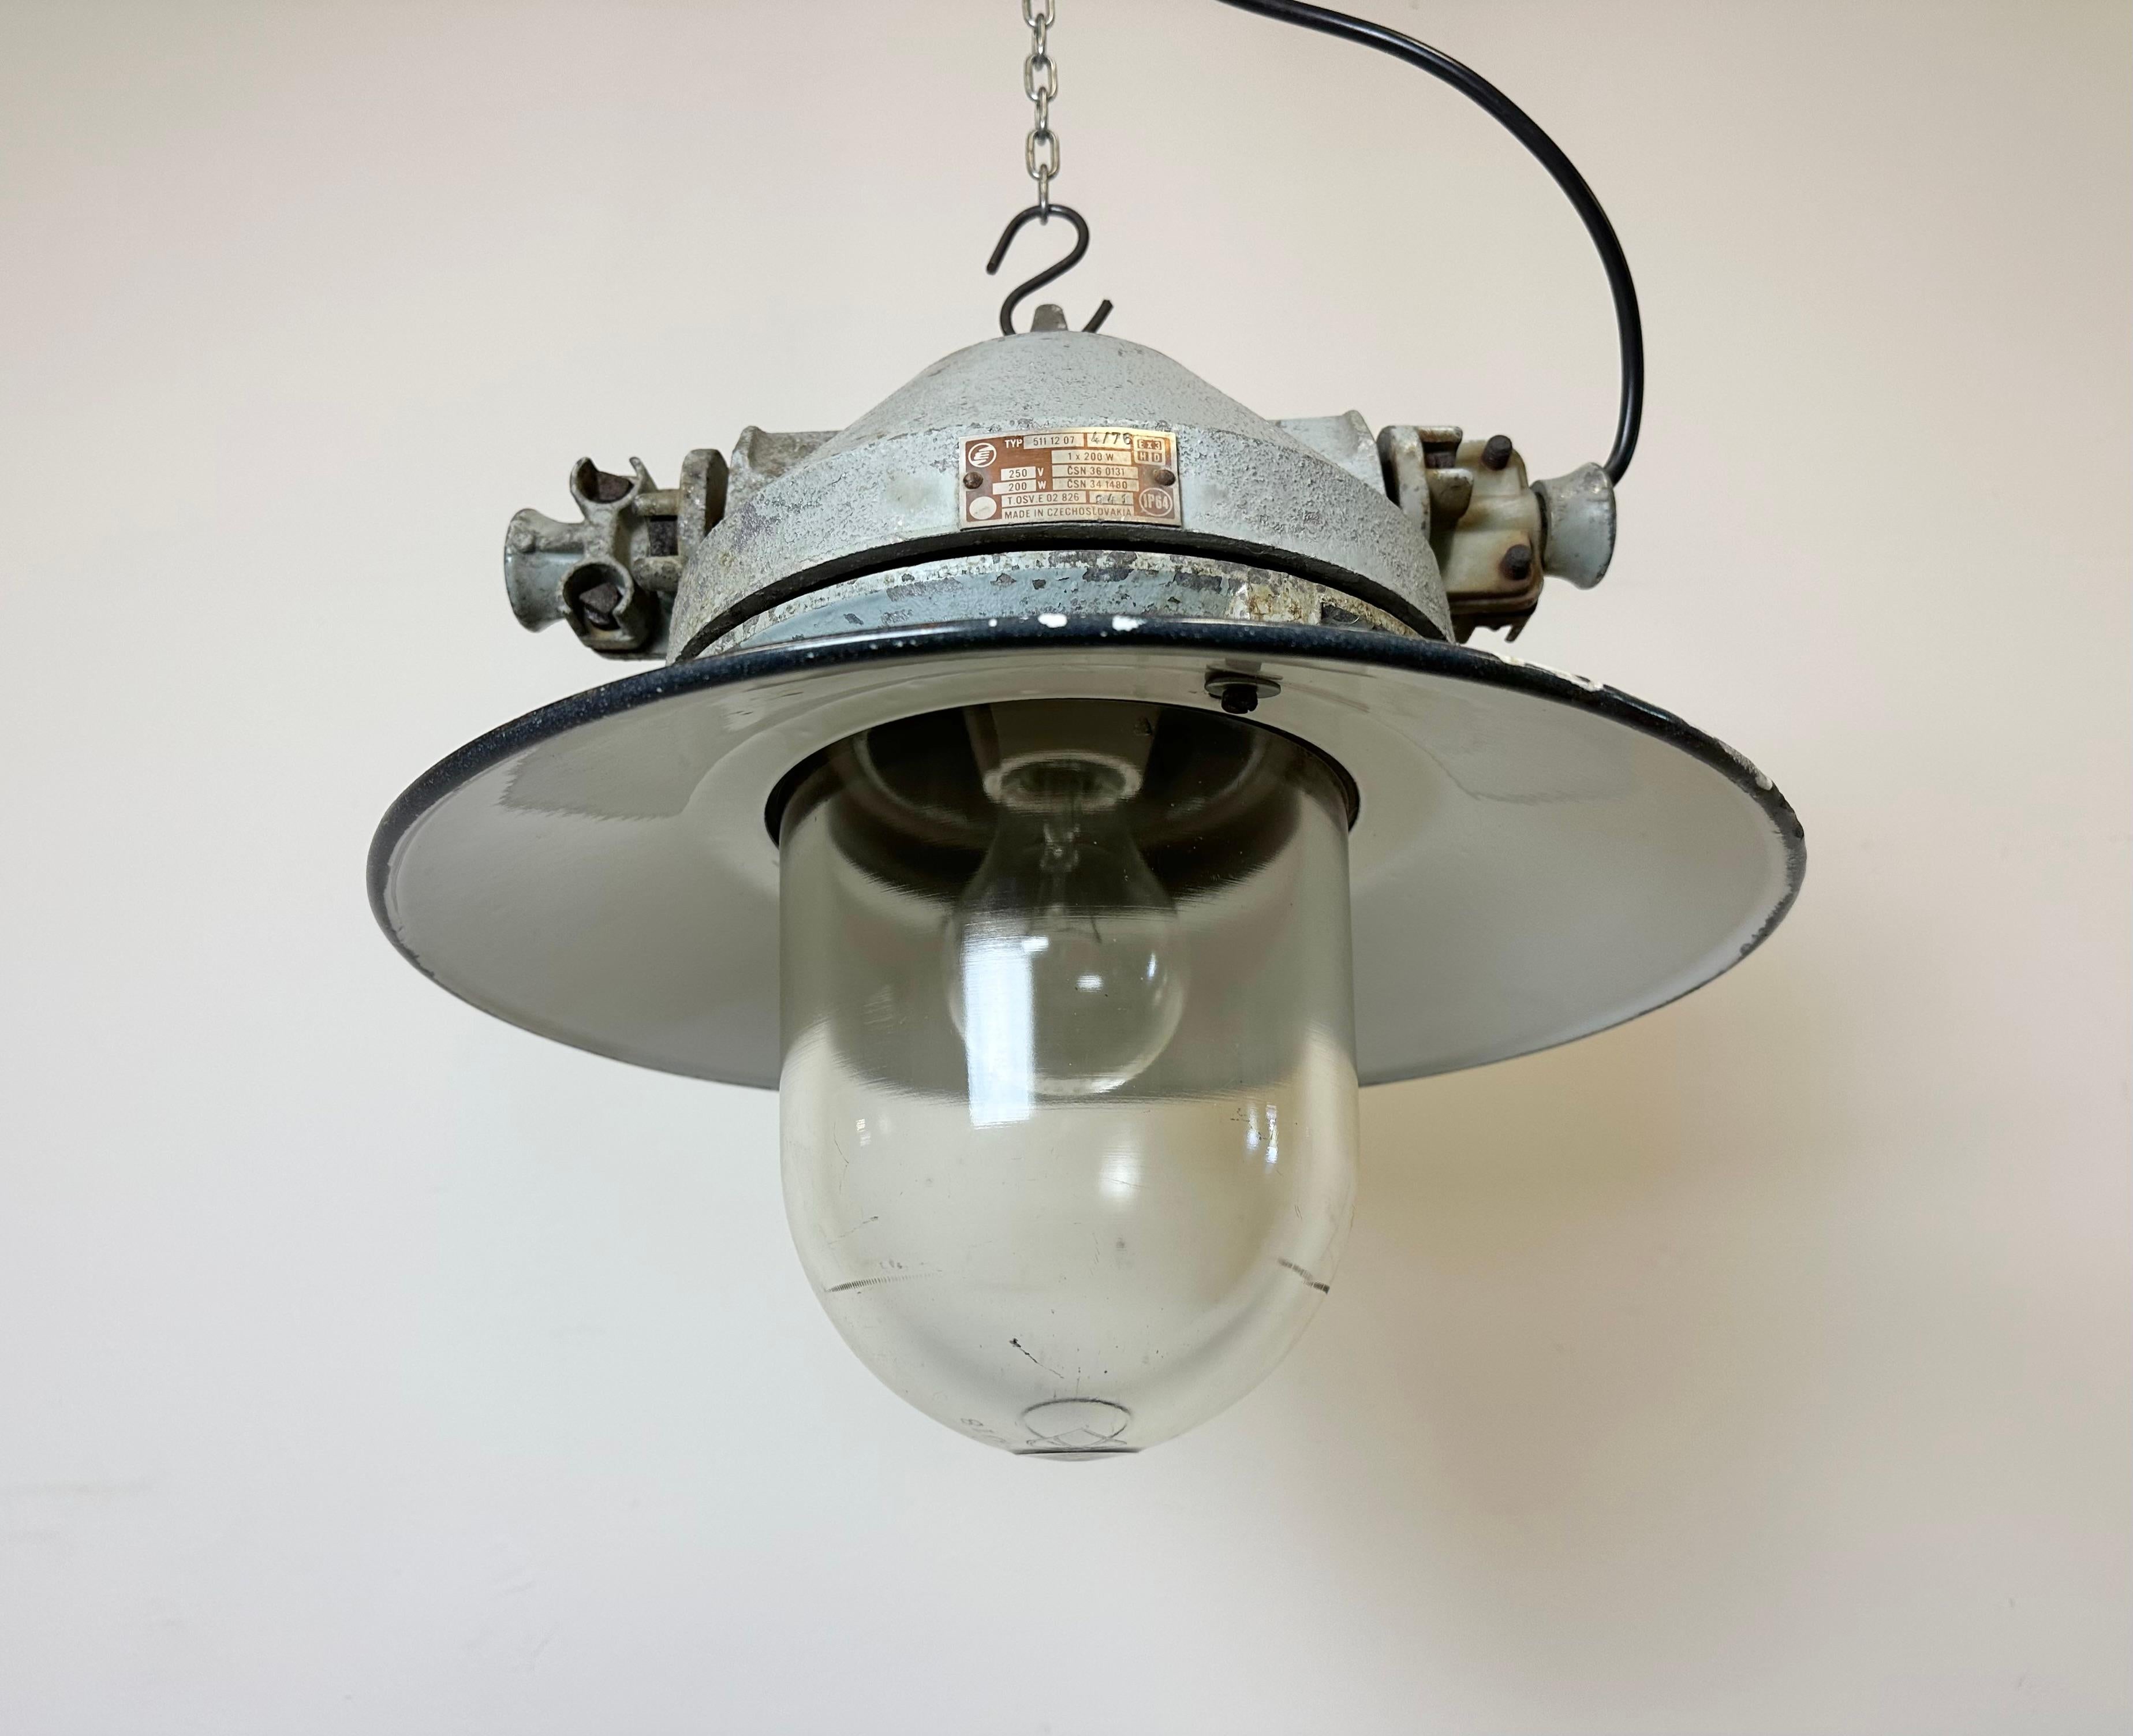 Grey Cast Aluminium Explosion Proof Lamp with Enameled Shade, 1970s For Sale 5